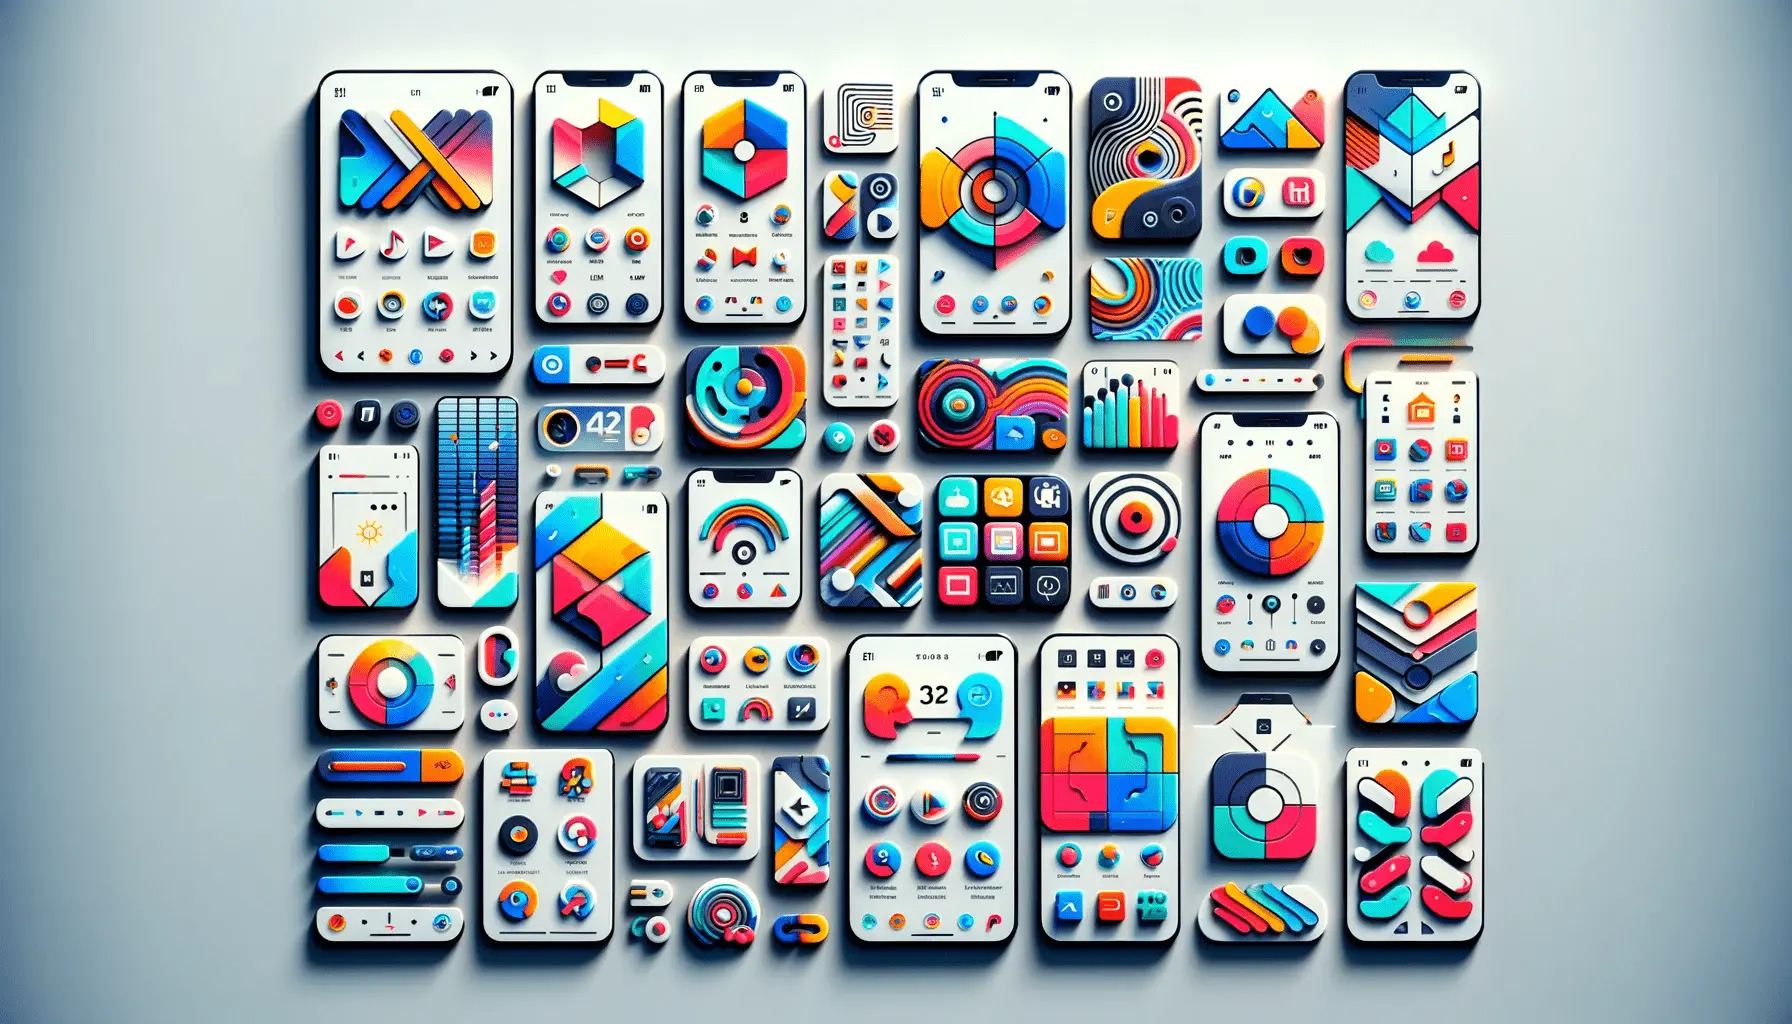 App Icons and Screenshots: Crafting Visuals that Captivate Users